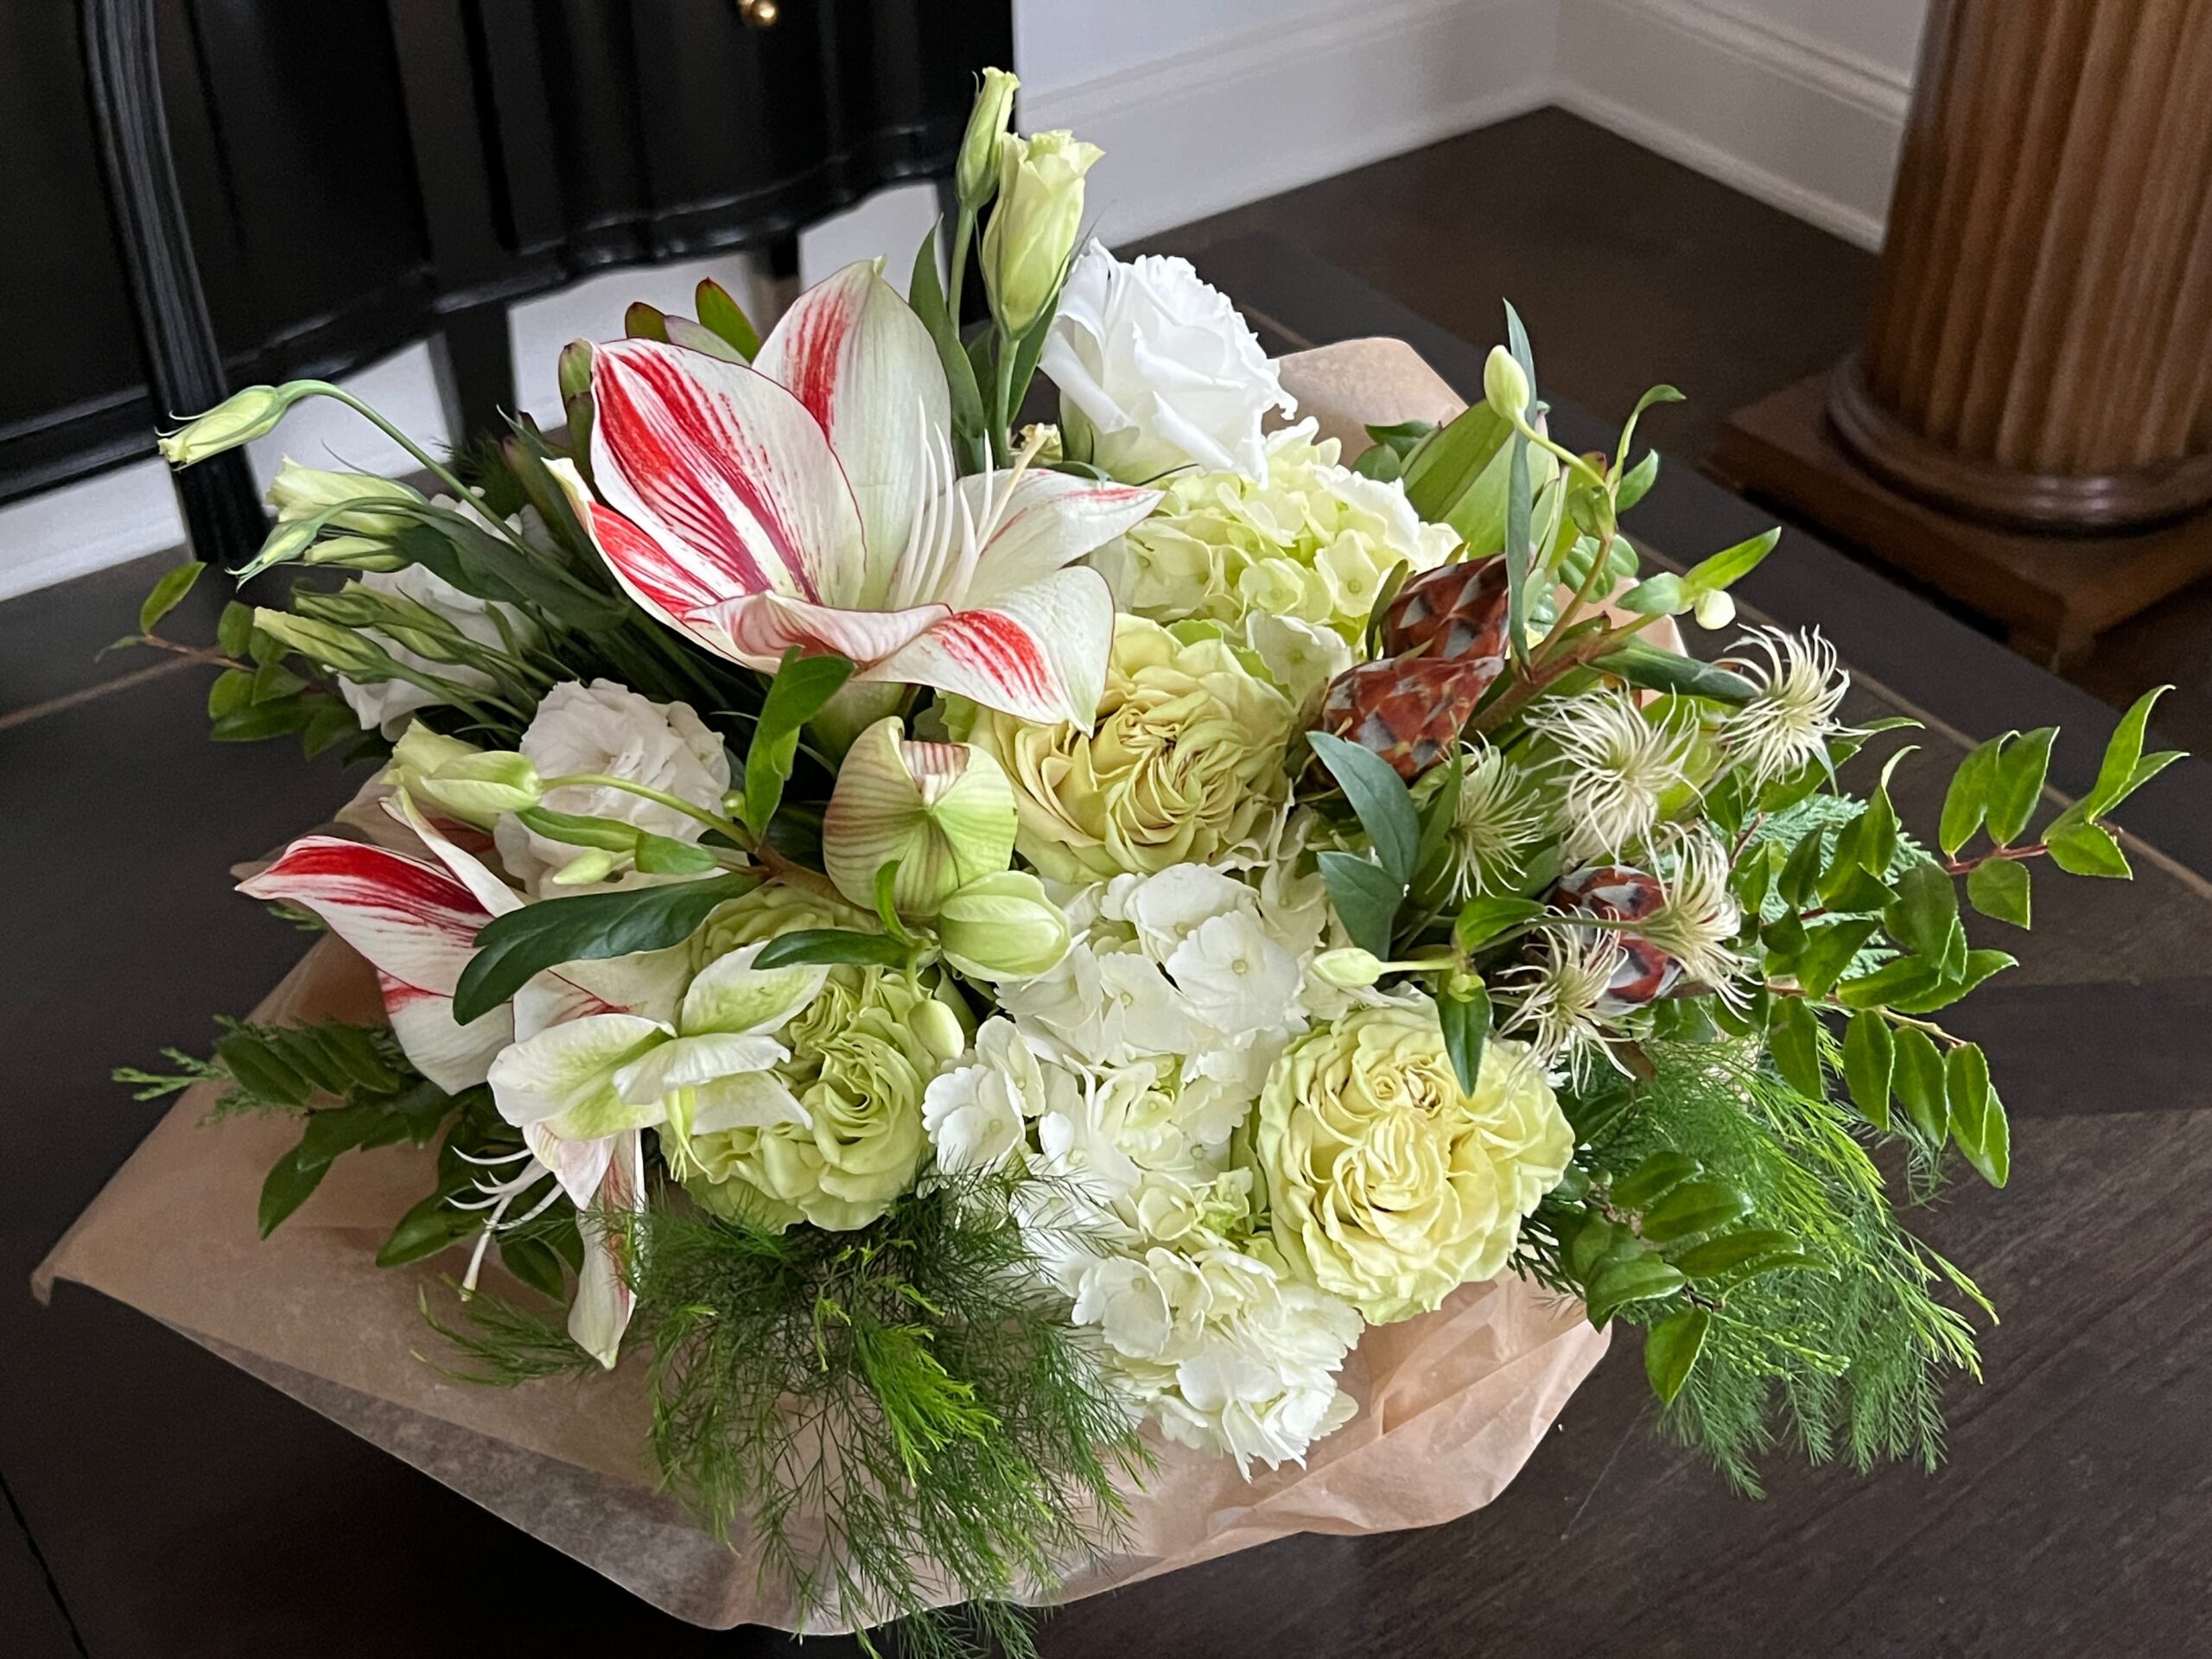 Tis the Season! Order Your Holiday Arrangements - The Shy Flower